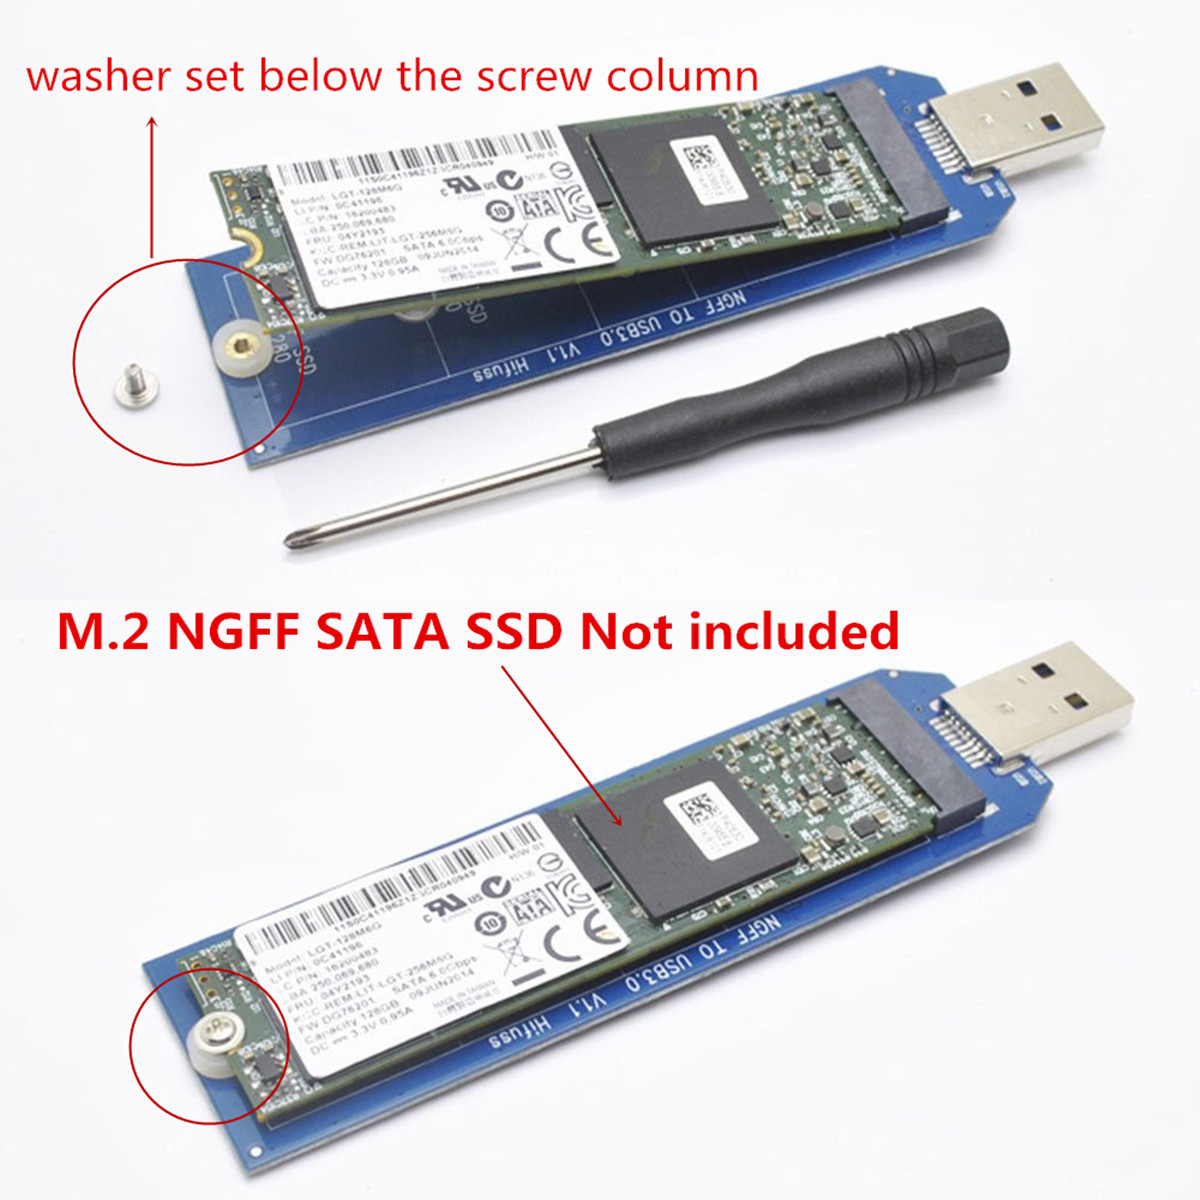 M.2 NGFF SSD SATA to USB 3.0 Converter Adapter External Enclosure Mobile SSD Case 126